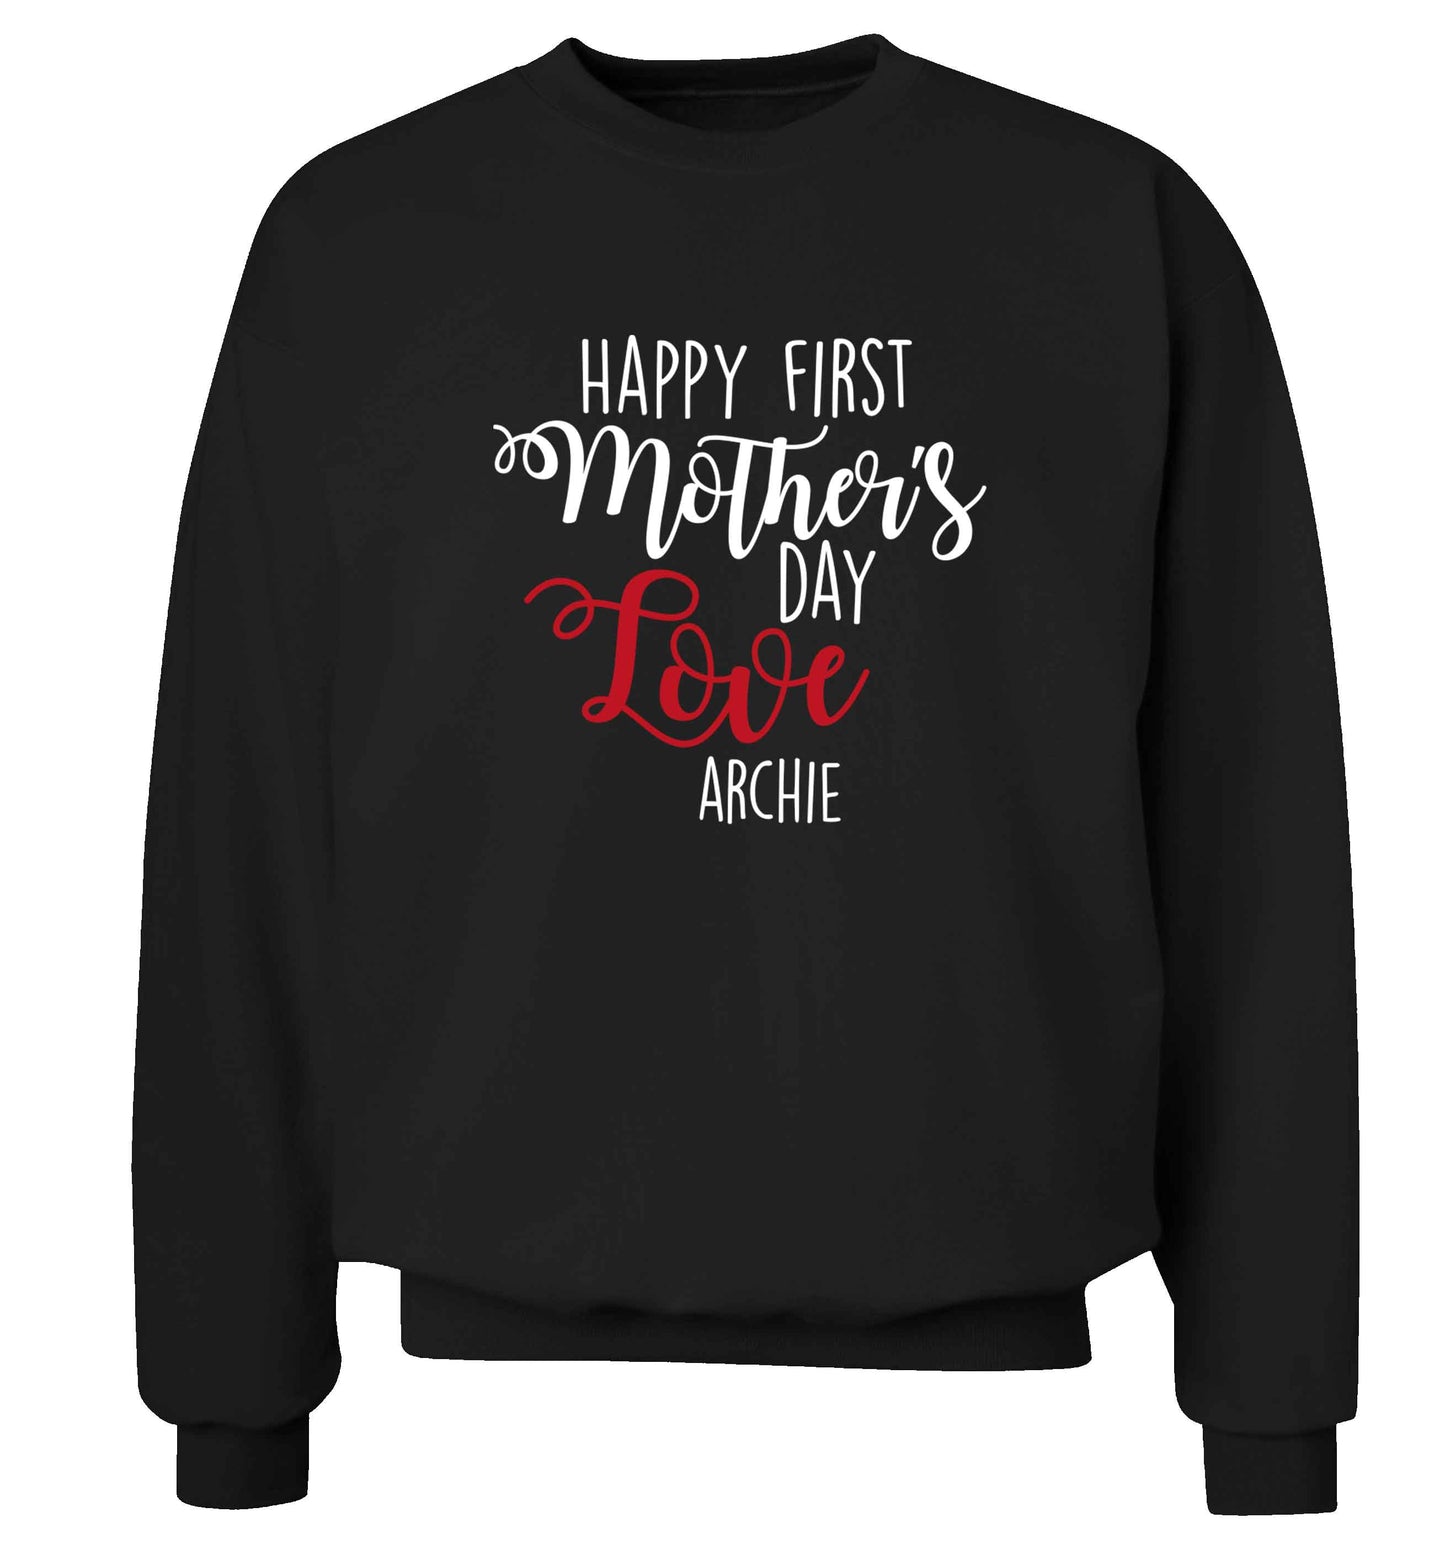 Personalised happy first mother's day love adult's unisex black sweater 2XL